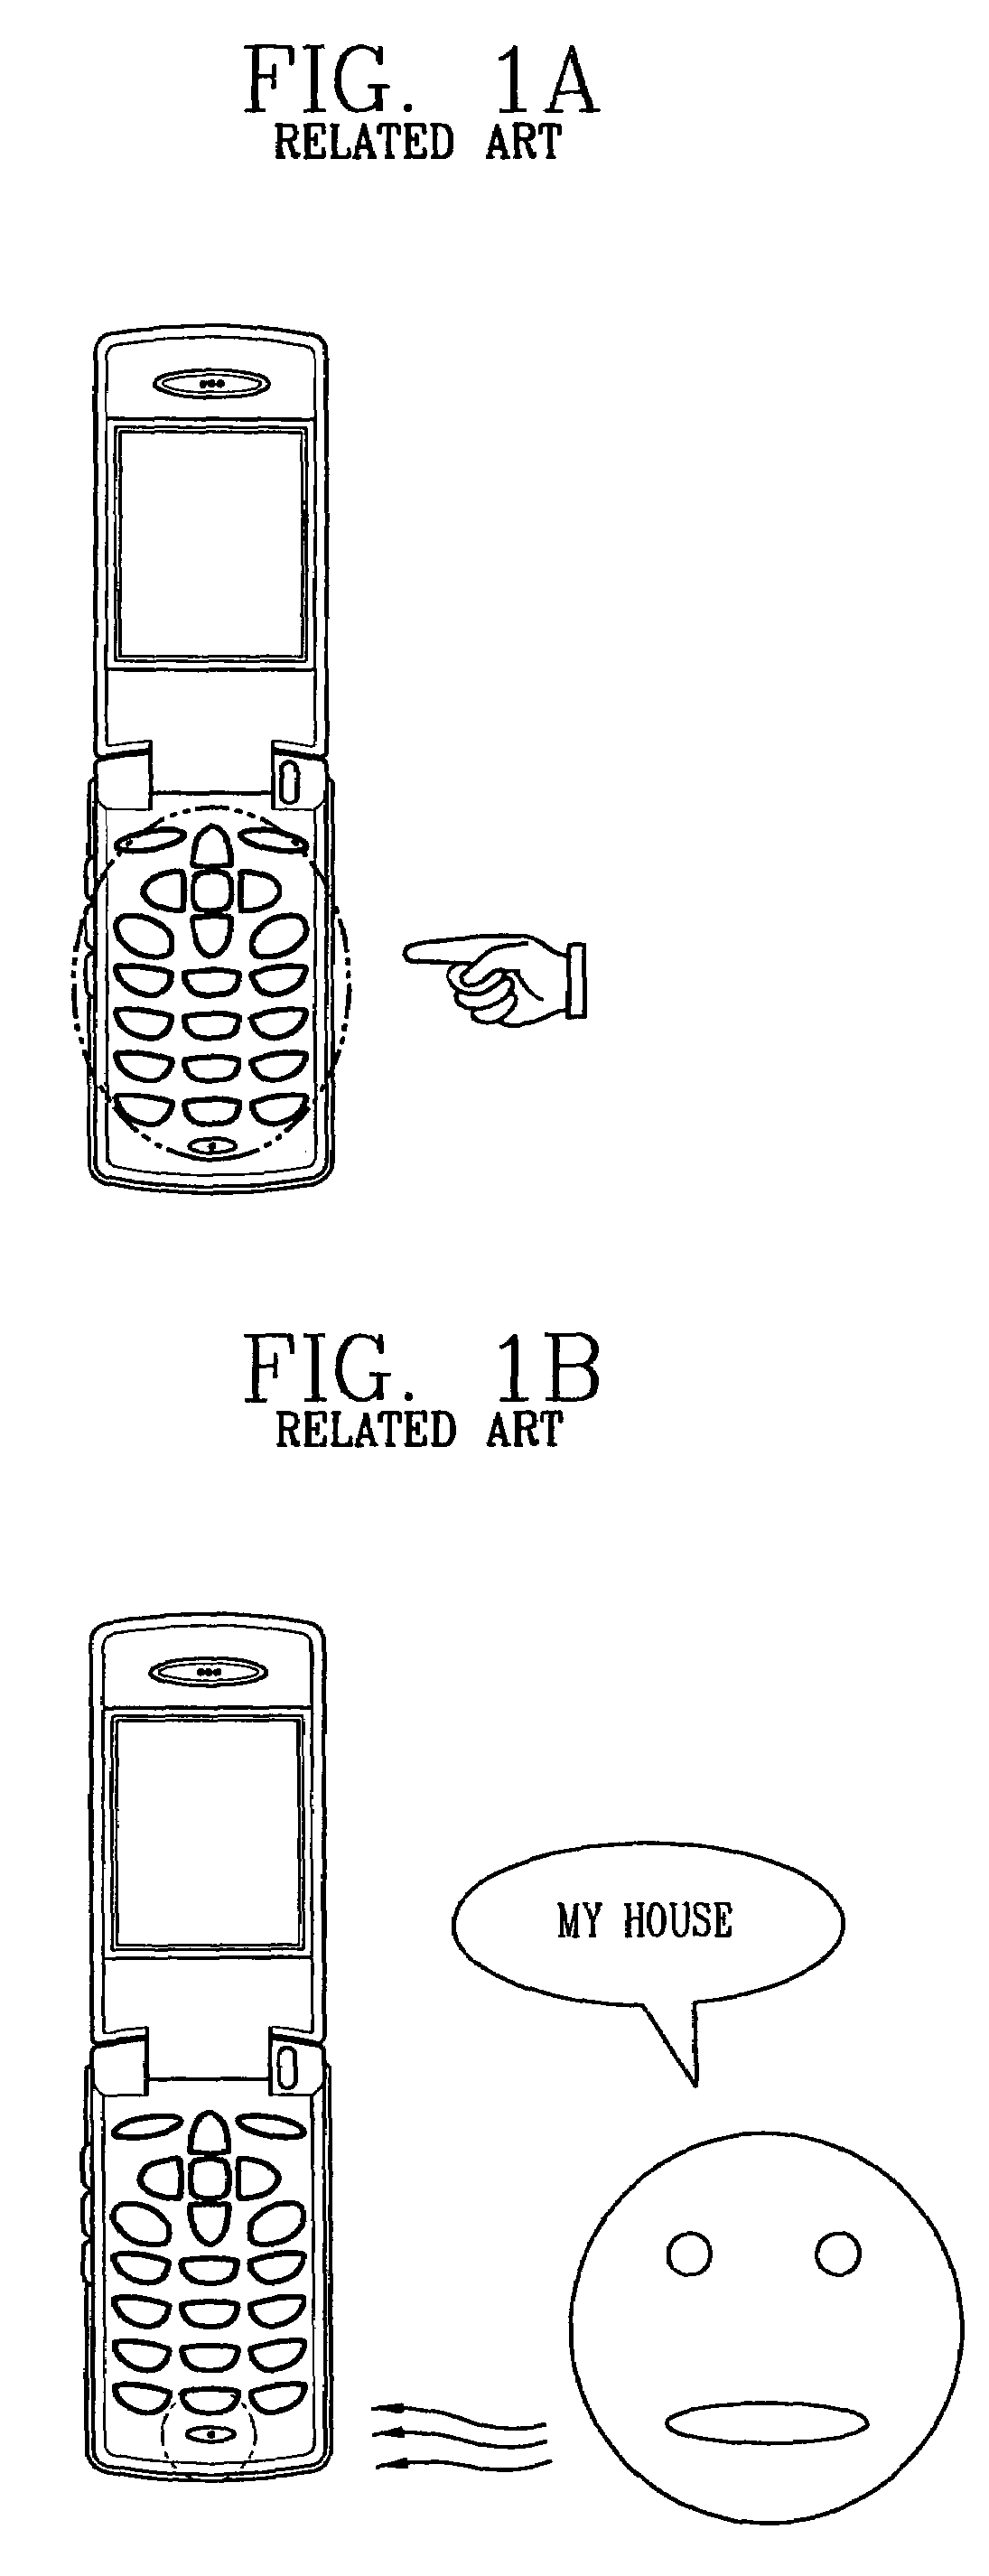 Apparatus for operating a mobile communication terminal with integrated photographic apparatus and method thereof